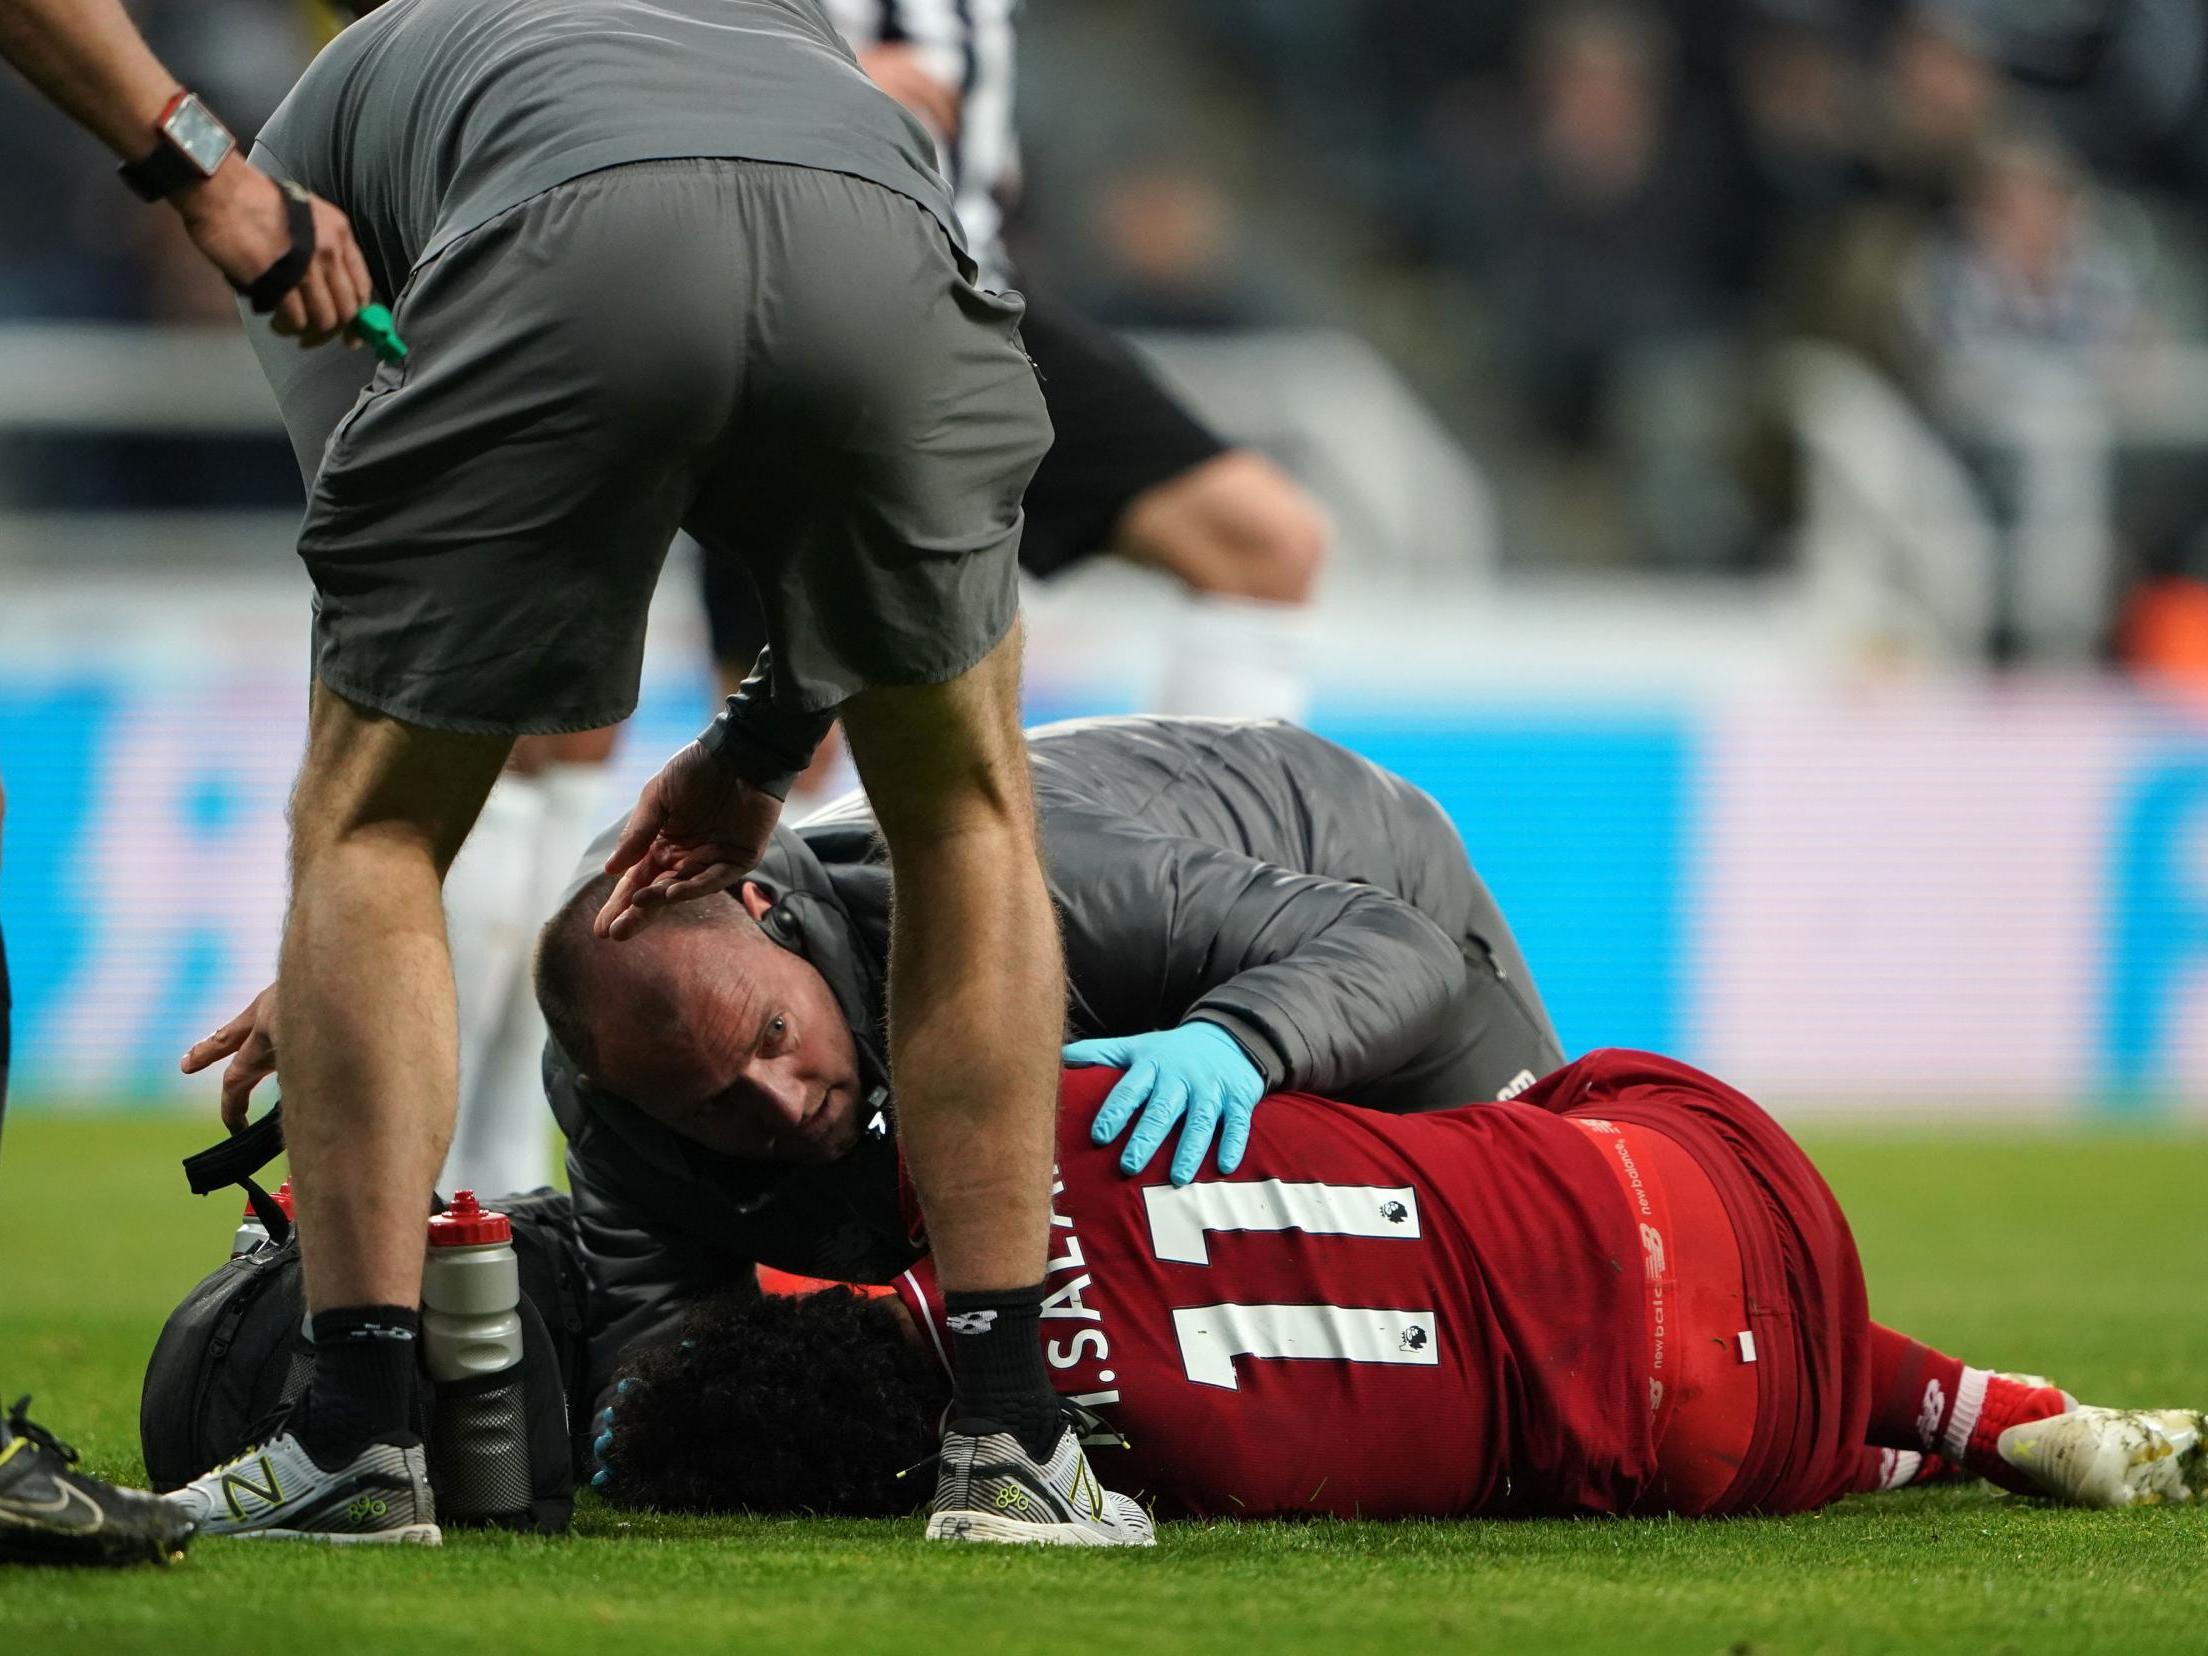 Salah is treated for a head injury